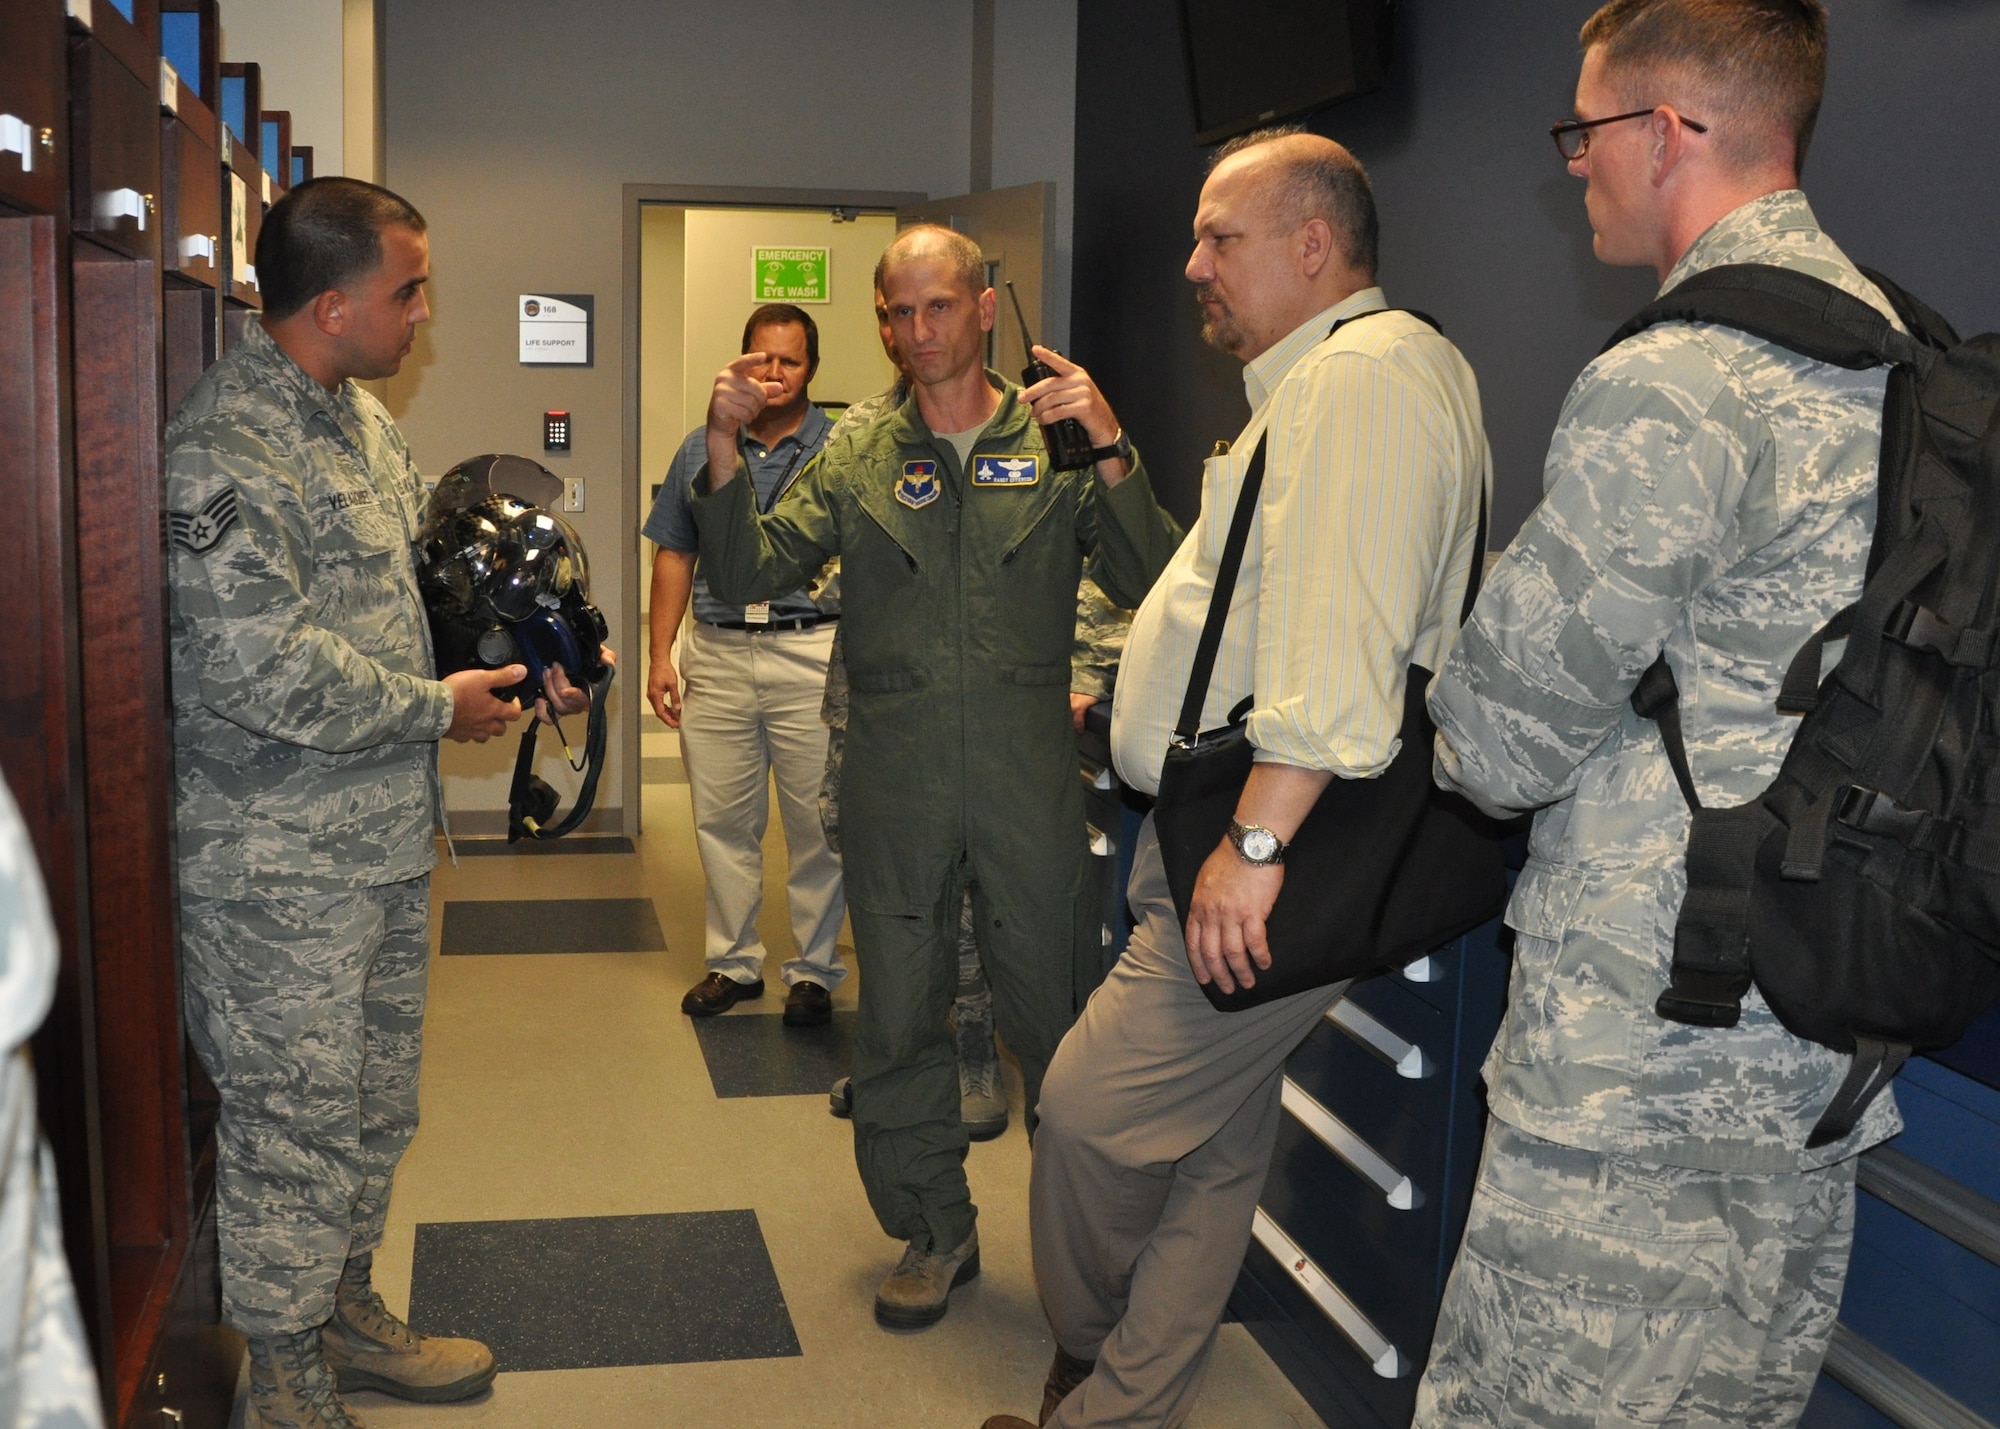 Lt. Col. Randal Efferson, center, and Staff Sgt. Lemuel Velazquez, left, explain to evaluators how the F-35 Lightning II helmet is custom fit to the pilot’s head. Velazquez said the key elements of the helmet are fully incorporated so the pilot can more effectively focus on his tasks and avoid cockpit distractions. Efferson is the deputy operations group commander, 33rd Fighter Wing and Velazquez is an aircrew flight technician, 33rd Operations Support Squadron. (U.S. Air Force photo/Major Karen Roganov)